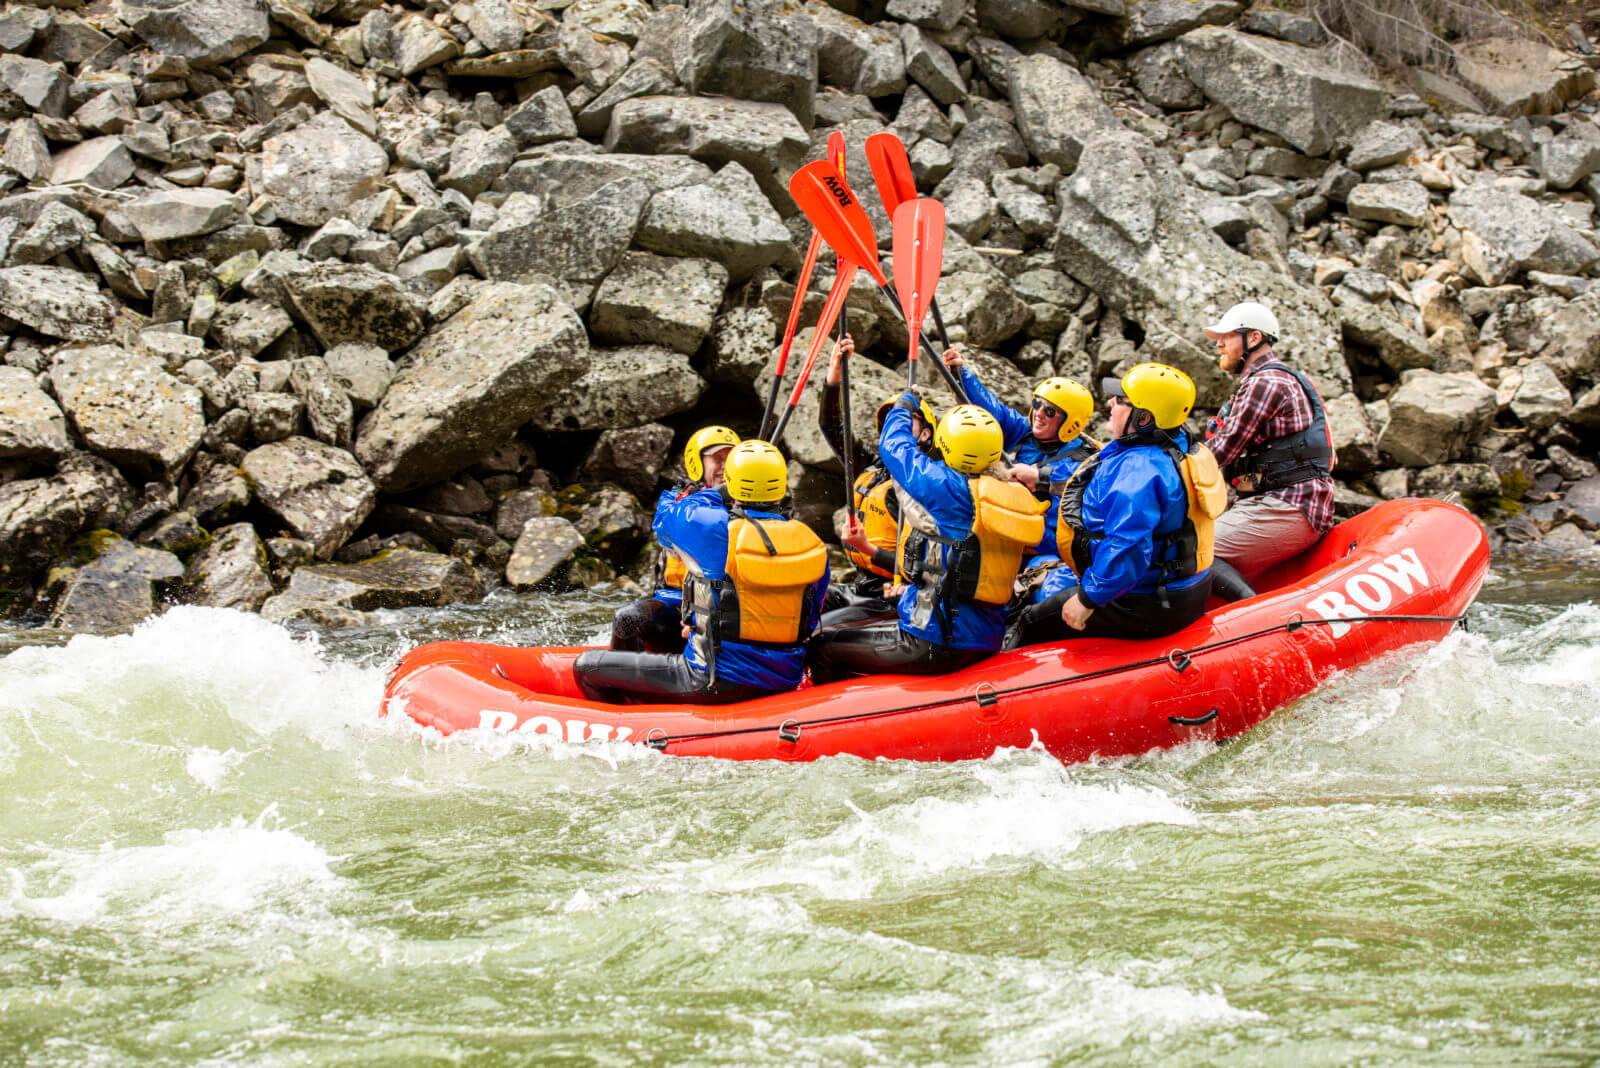 people smack their red rafting paddles together in excitement as they raft down the Lochsa River